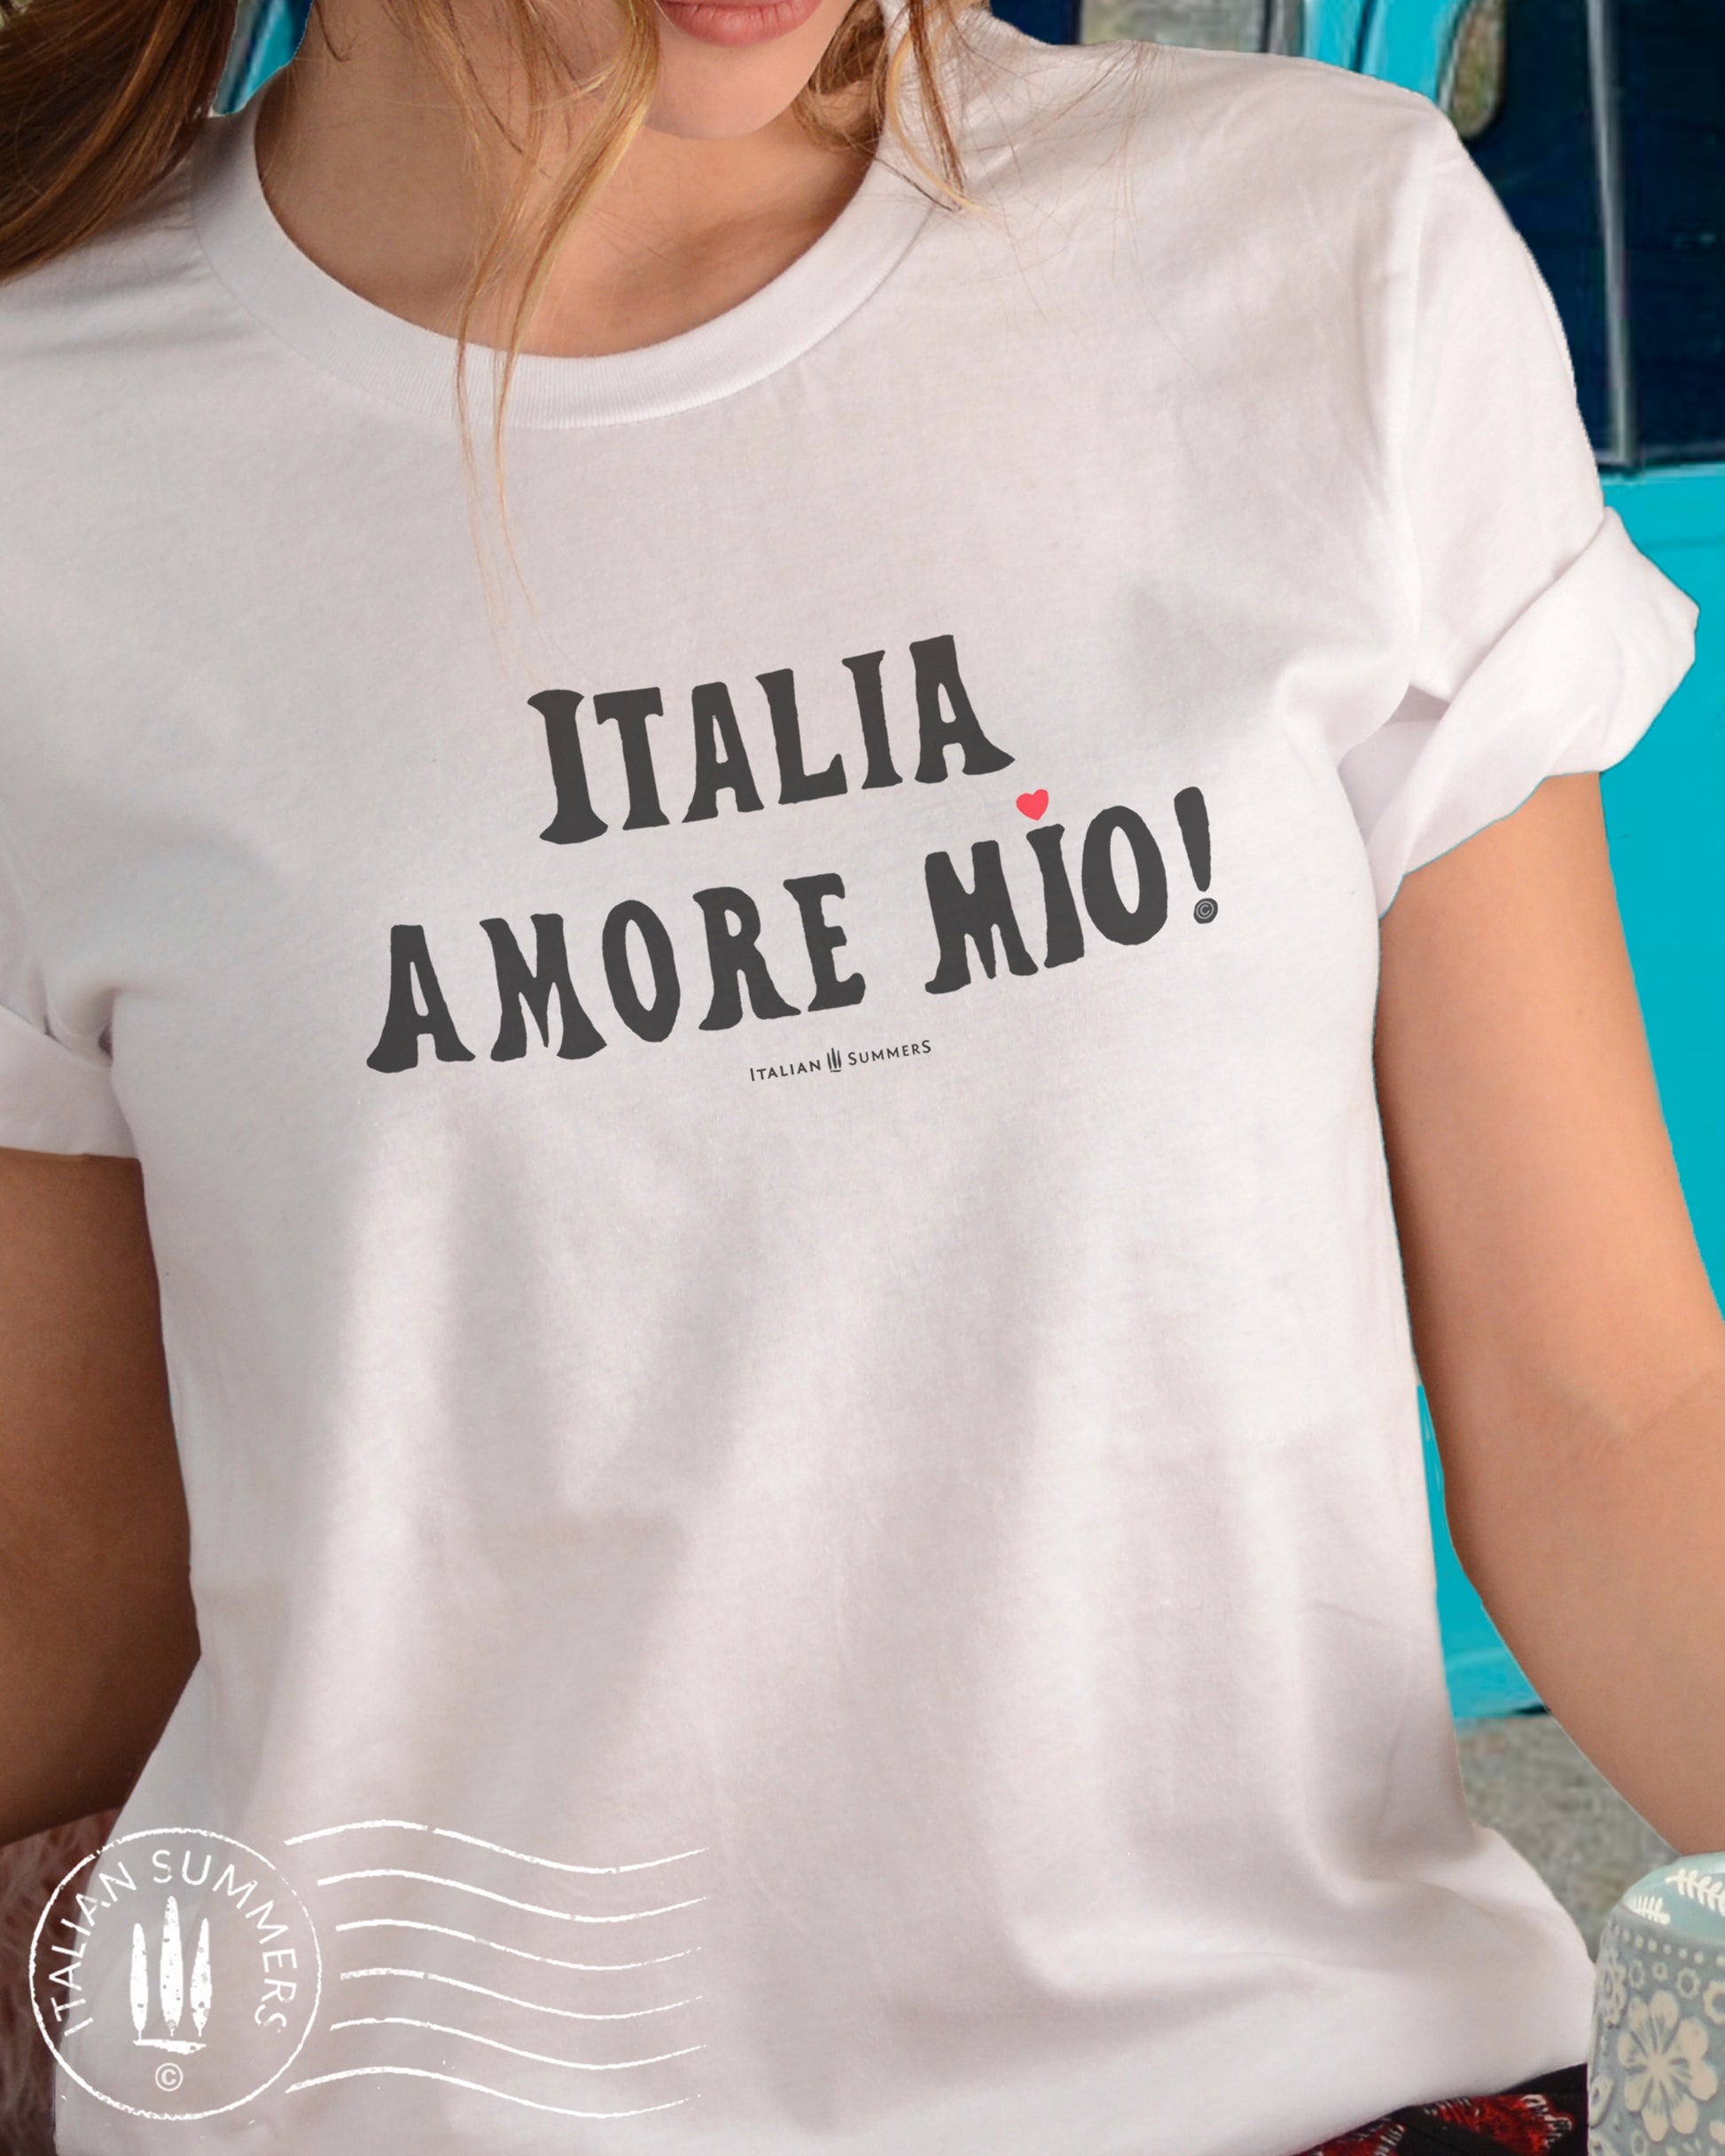 Italy T Shirt  Italia Amore Mio,  white cotton with bold black  hand-painted text  "Italia Amore Mio" the 'I' on the word 'mio' is punctuated by a small red heart. Made By Italian Summers